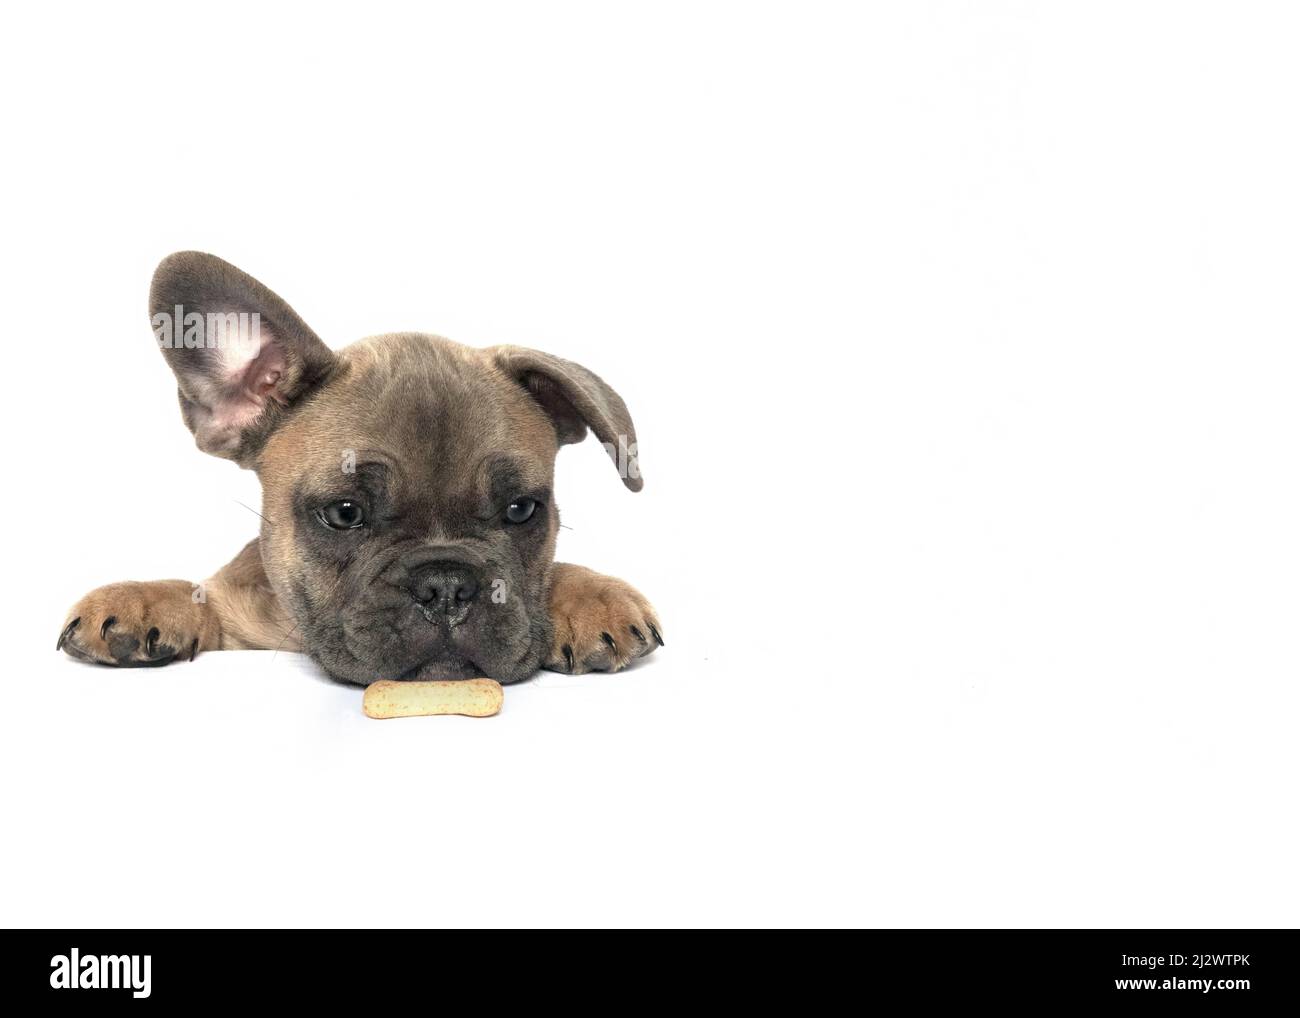 french bulldog puppy  showing face shoulders and paws  big eye looking at a biscuit isolated in white used for placard advertising  signs posters and Stock Photo